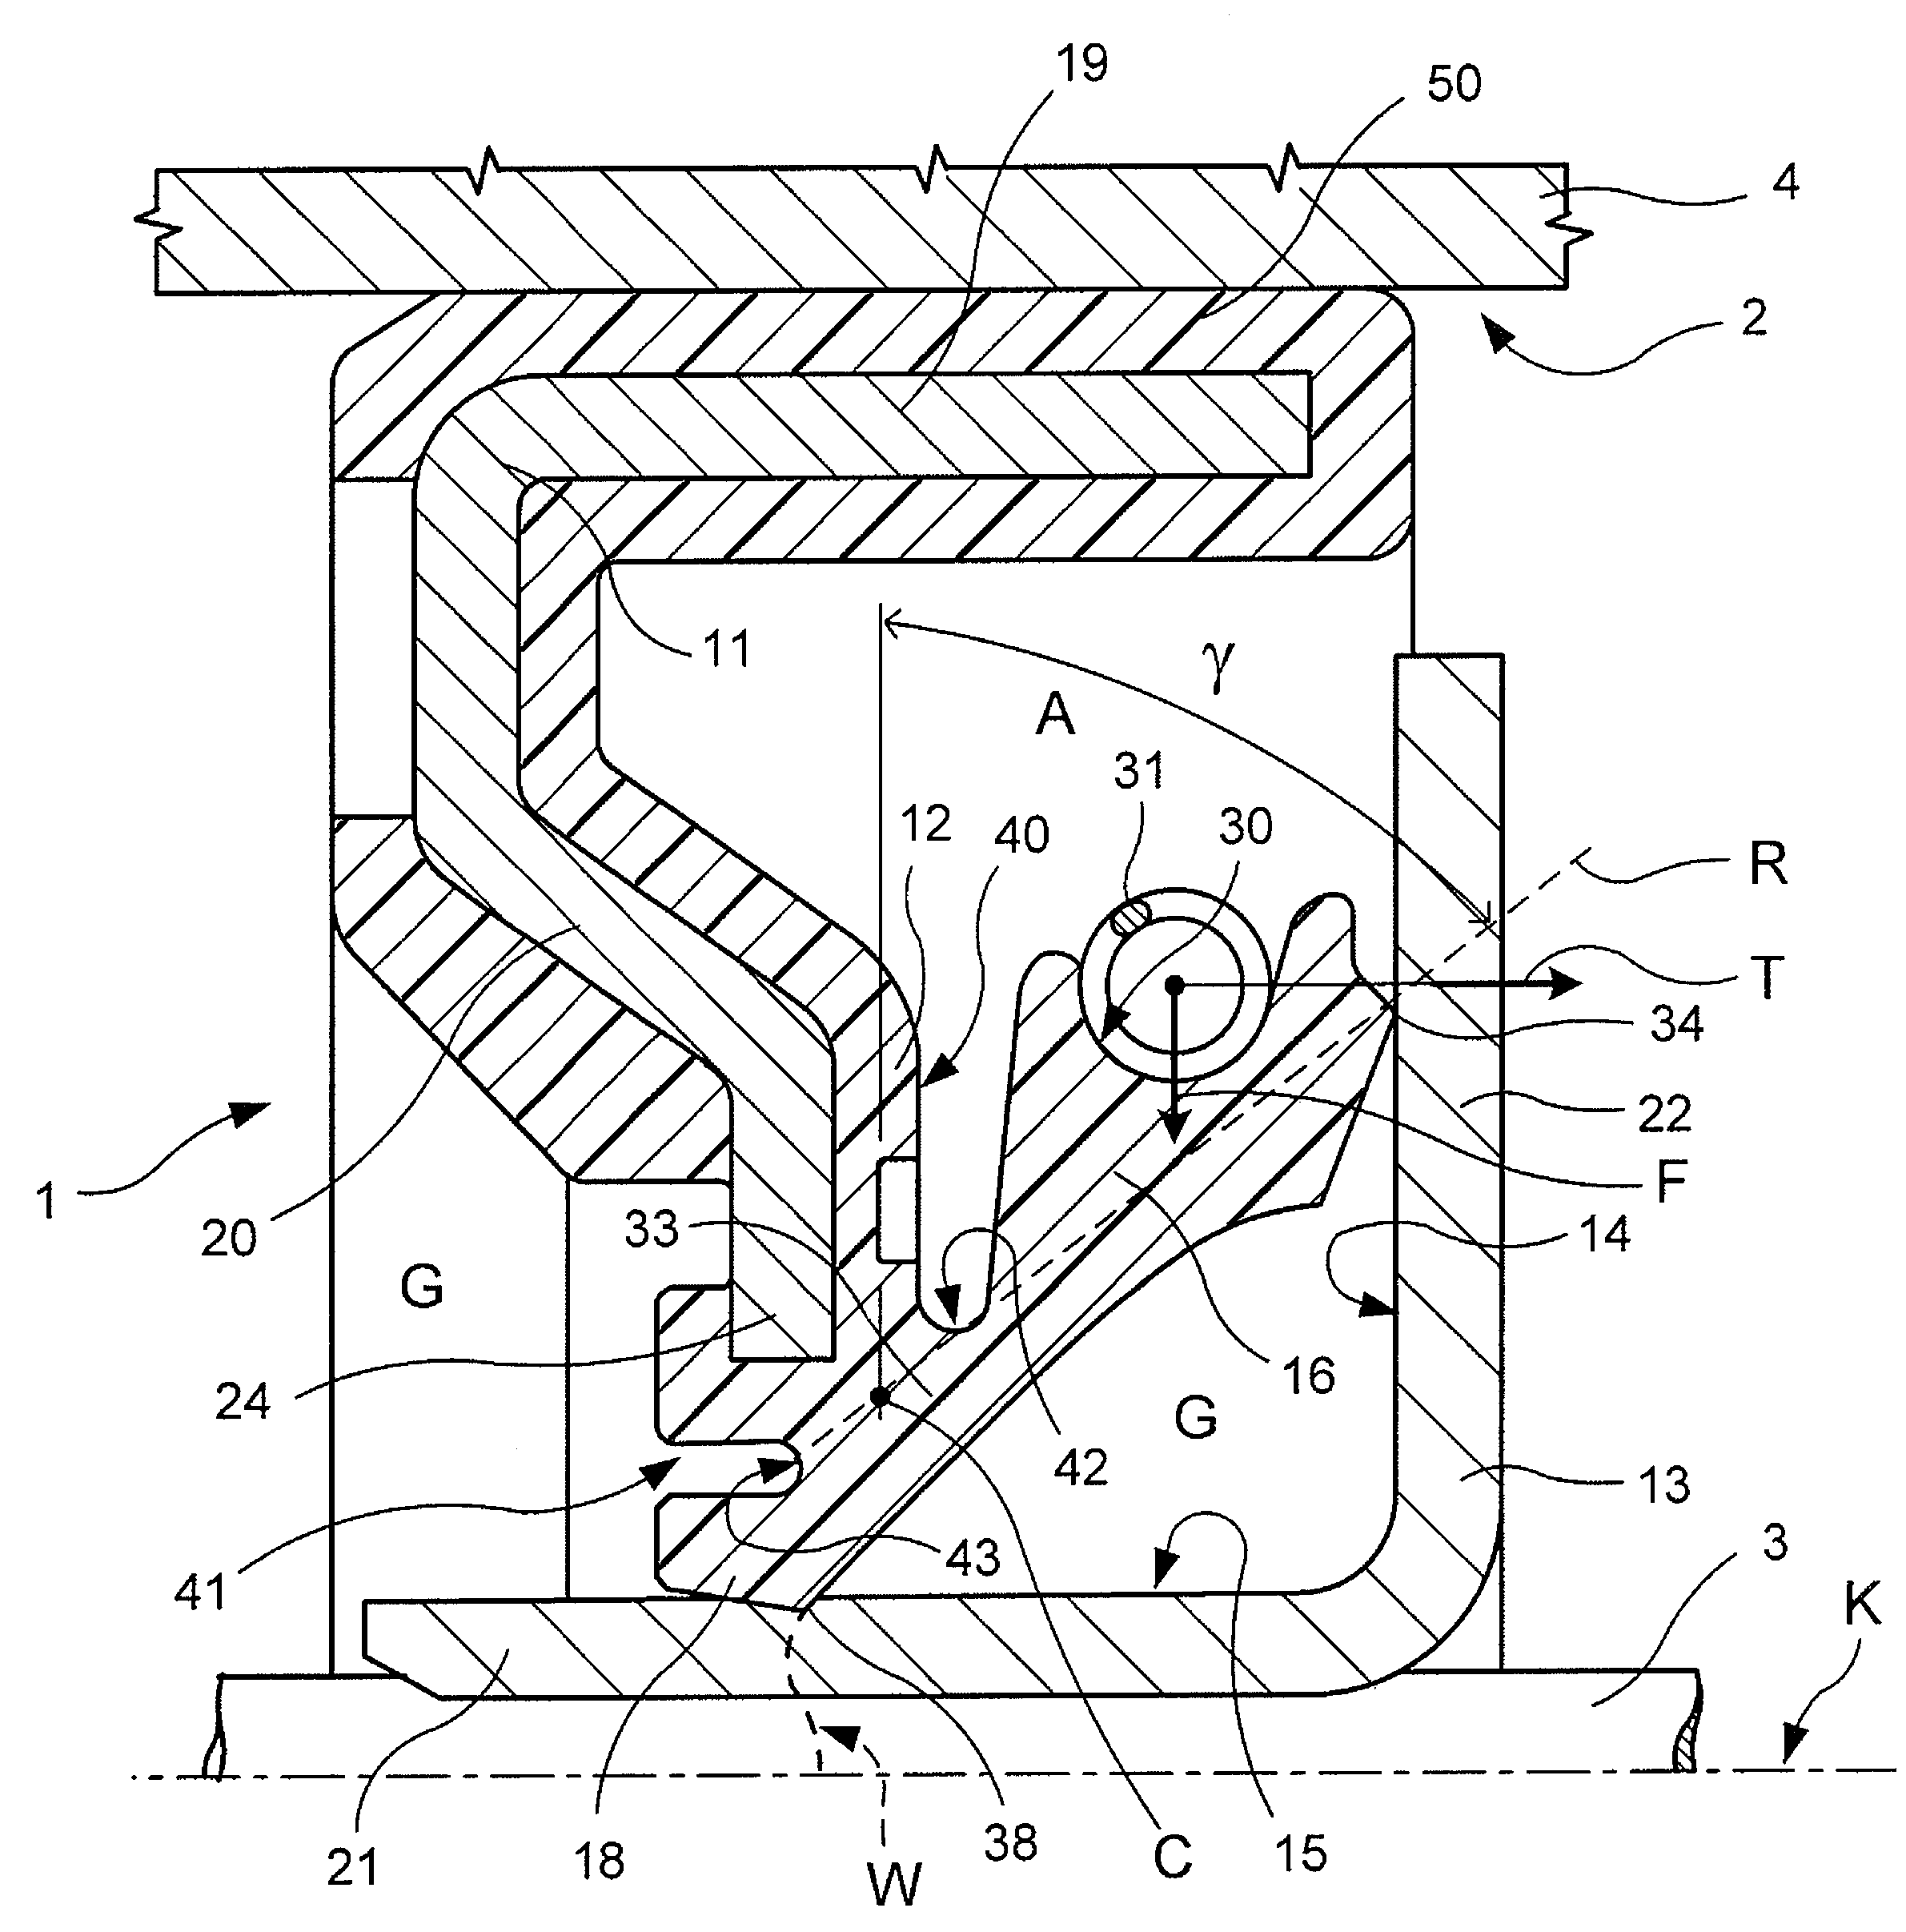 Annular seal assembly for insertion between two relatively rotatable members and method for its use